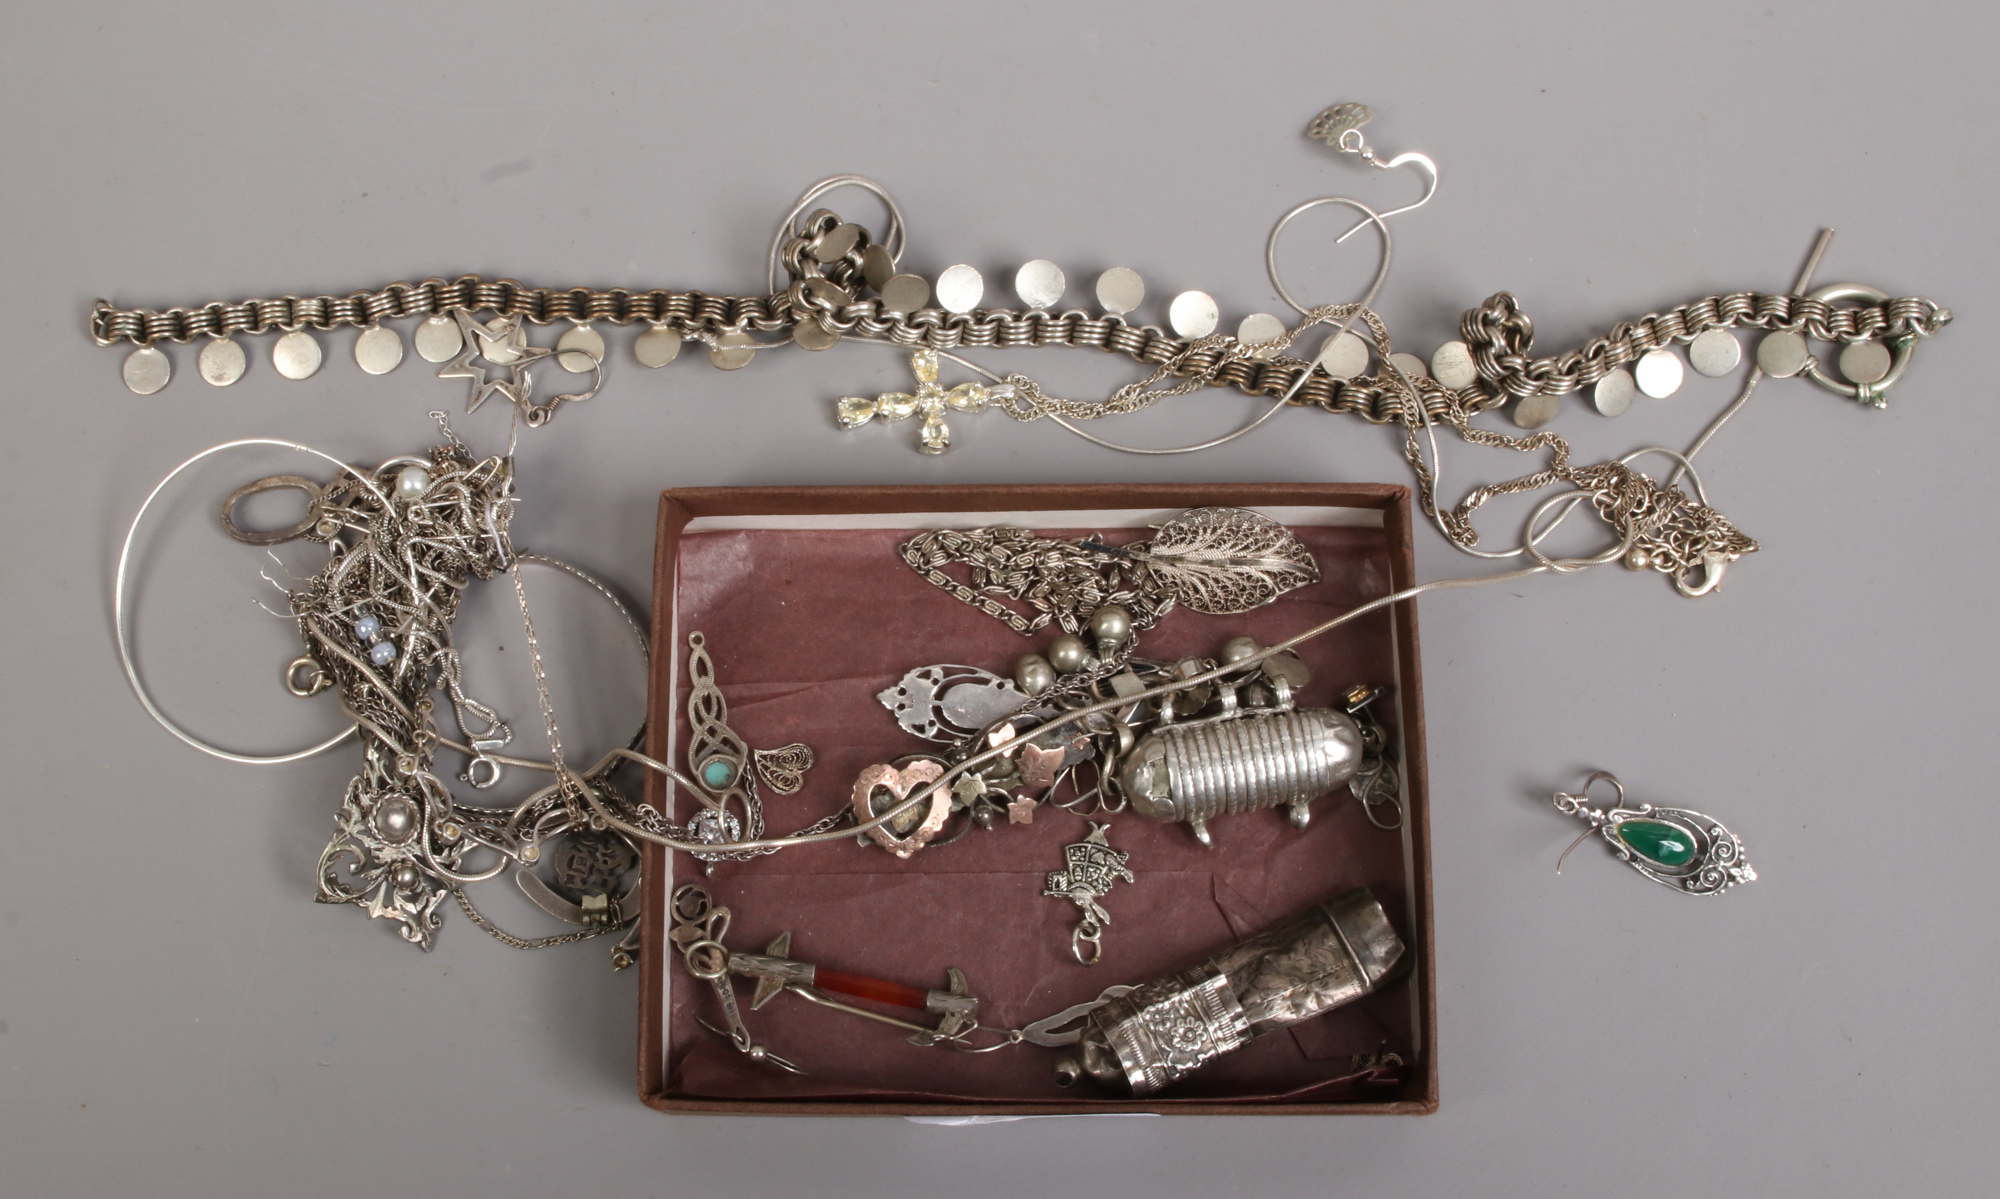 A quantity of silver and white metal jewellery oddments, including brooches, necklaces, earrings